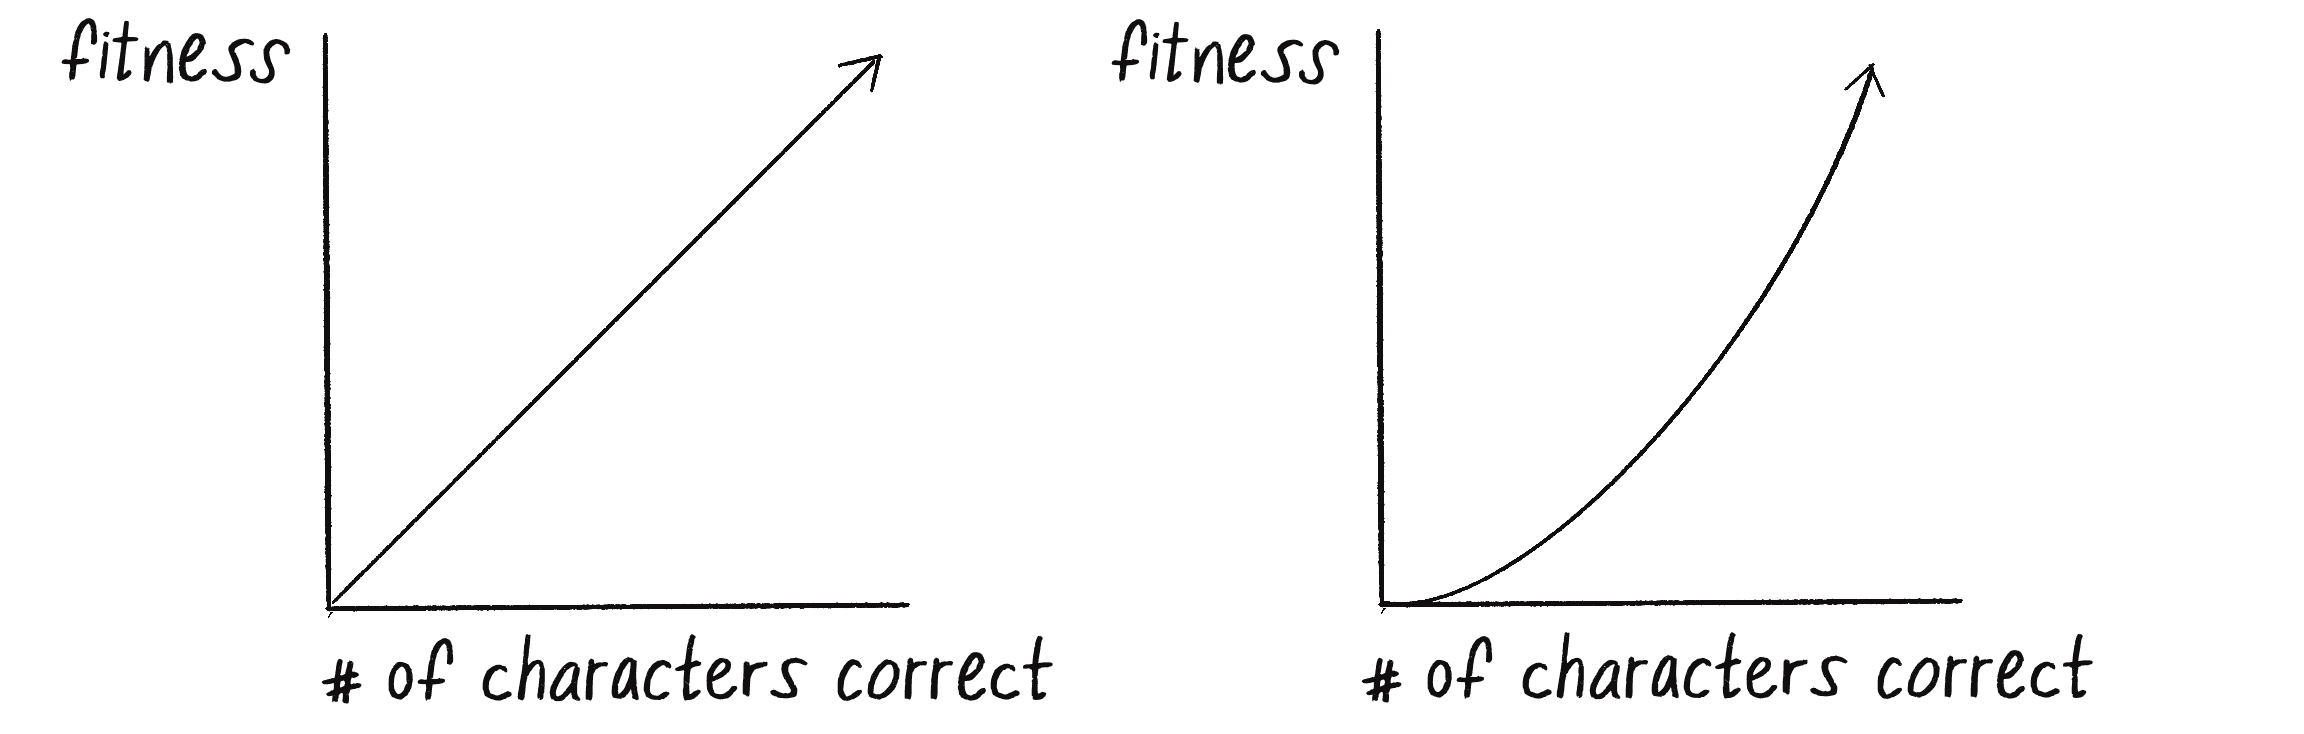 Figure 9.8: A fitness graph of y = x (left) and of y = x^2 (right)